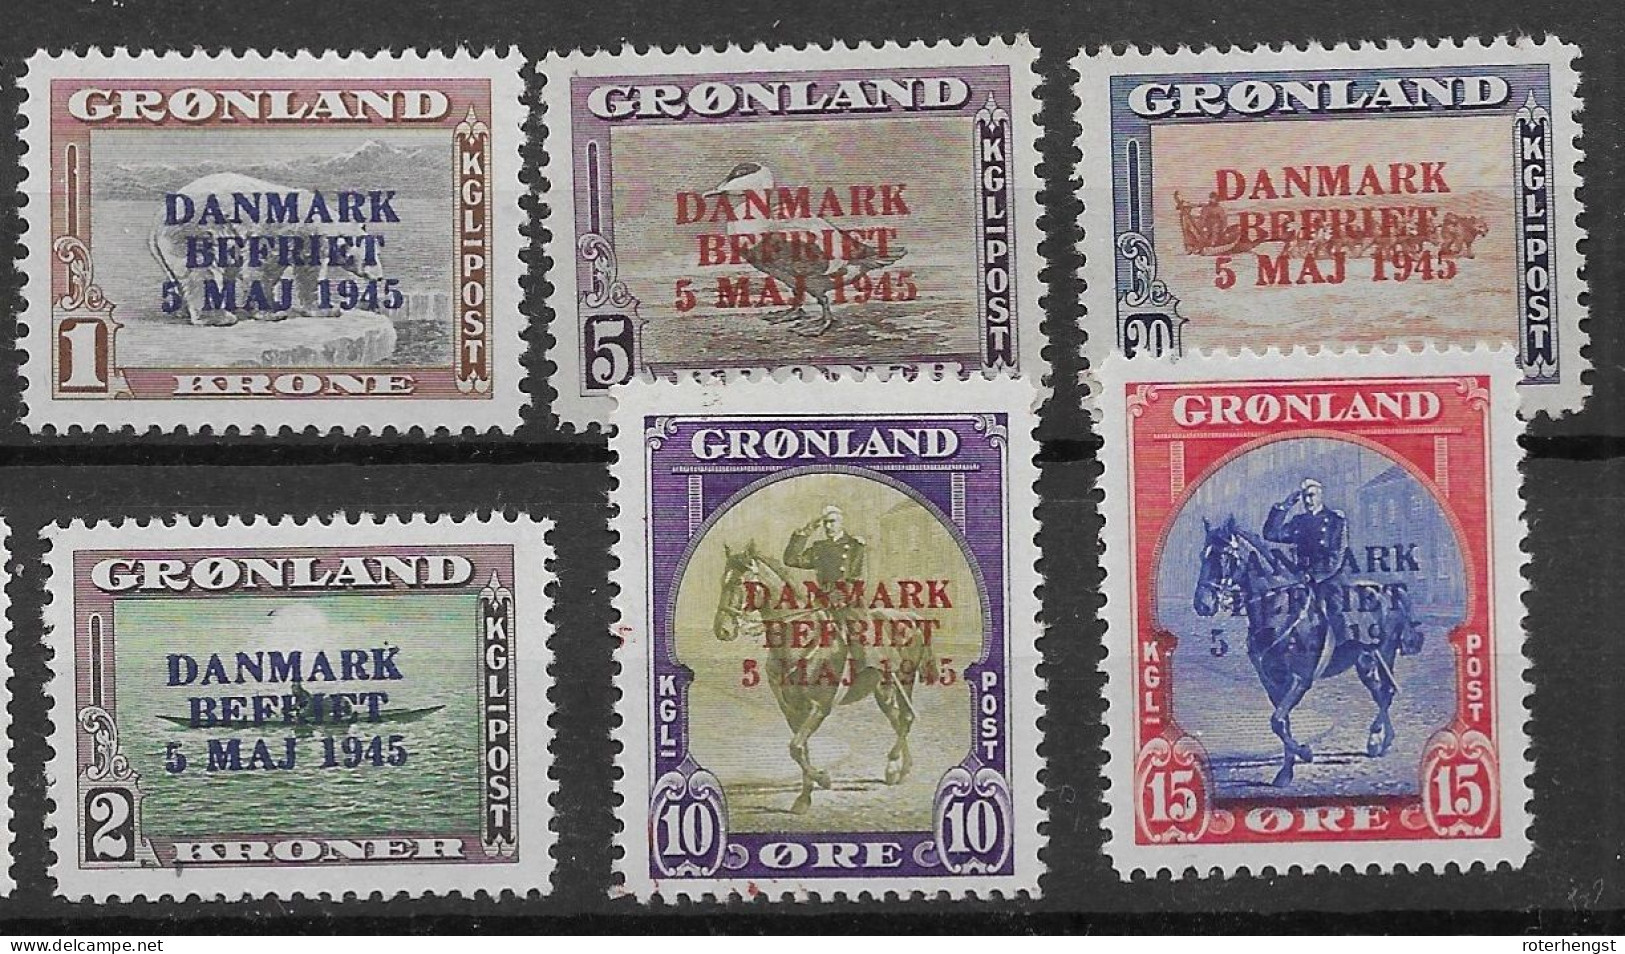 Greenland RARE Complete Set With Error Colour Overprints 1945 (1800 Euros) Mlh * Mint Extremely Low Hinge Trace - Unused Stamps